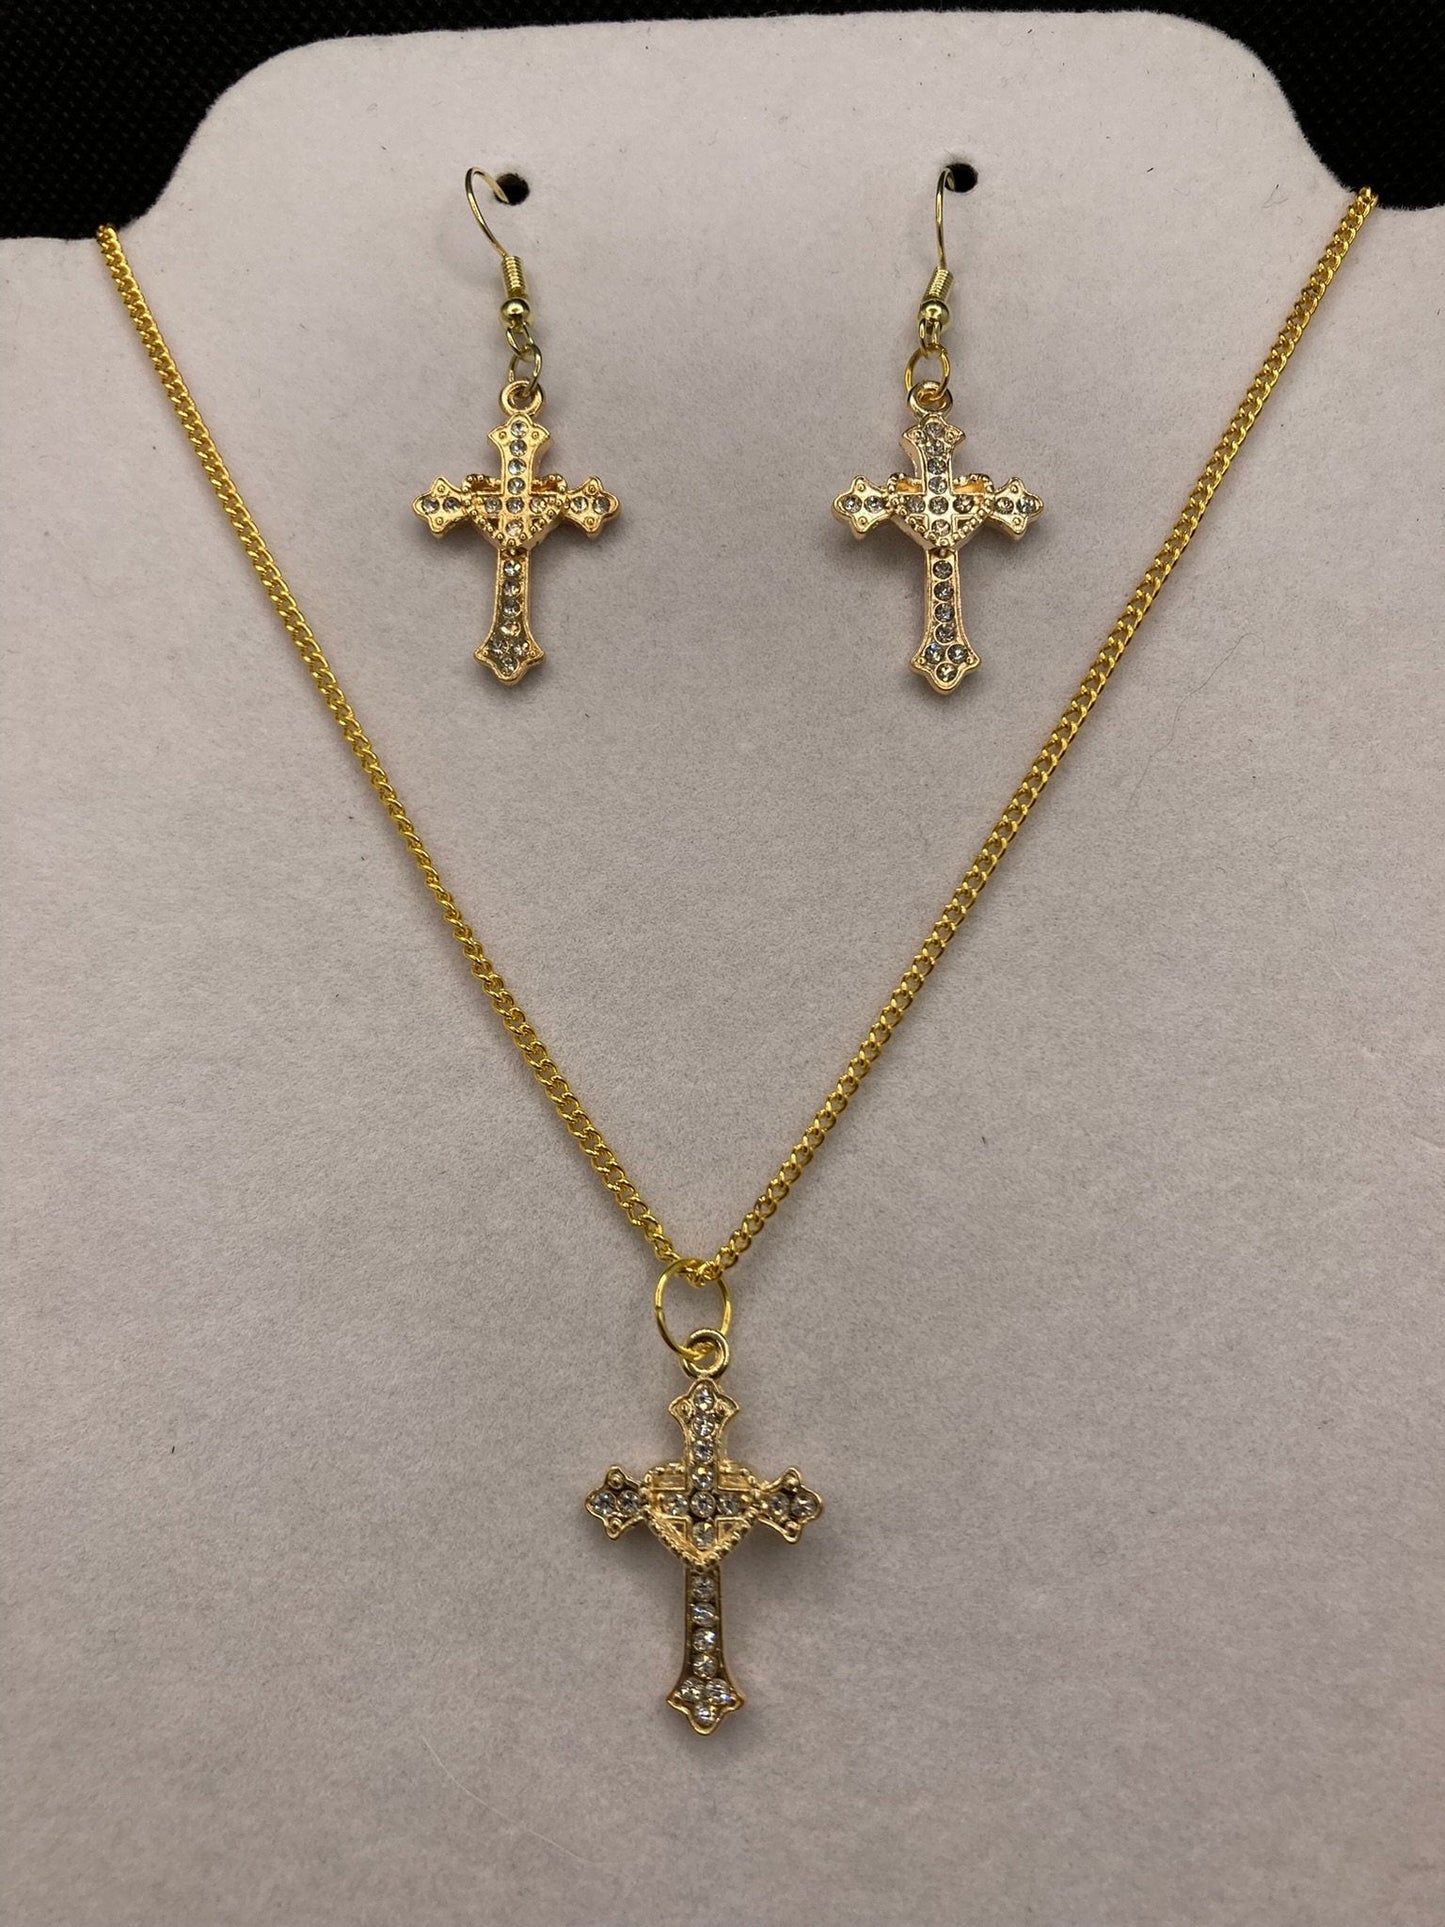 Gold Cross w Rhinestones Necklace and Earring Set with Specialty Chain, Southwest, Religious and Country Jewelry